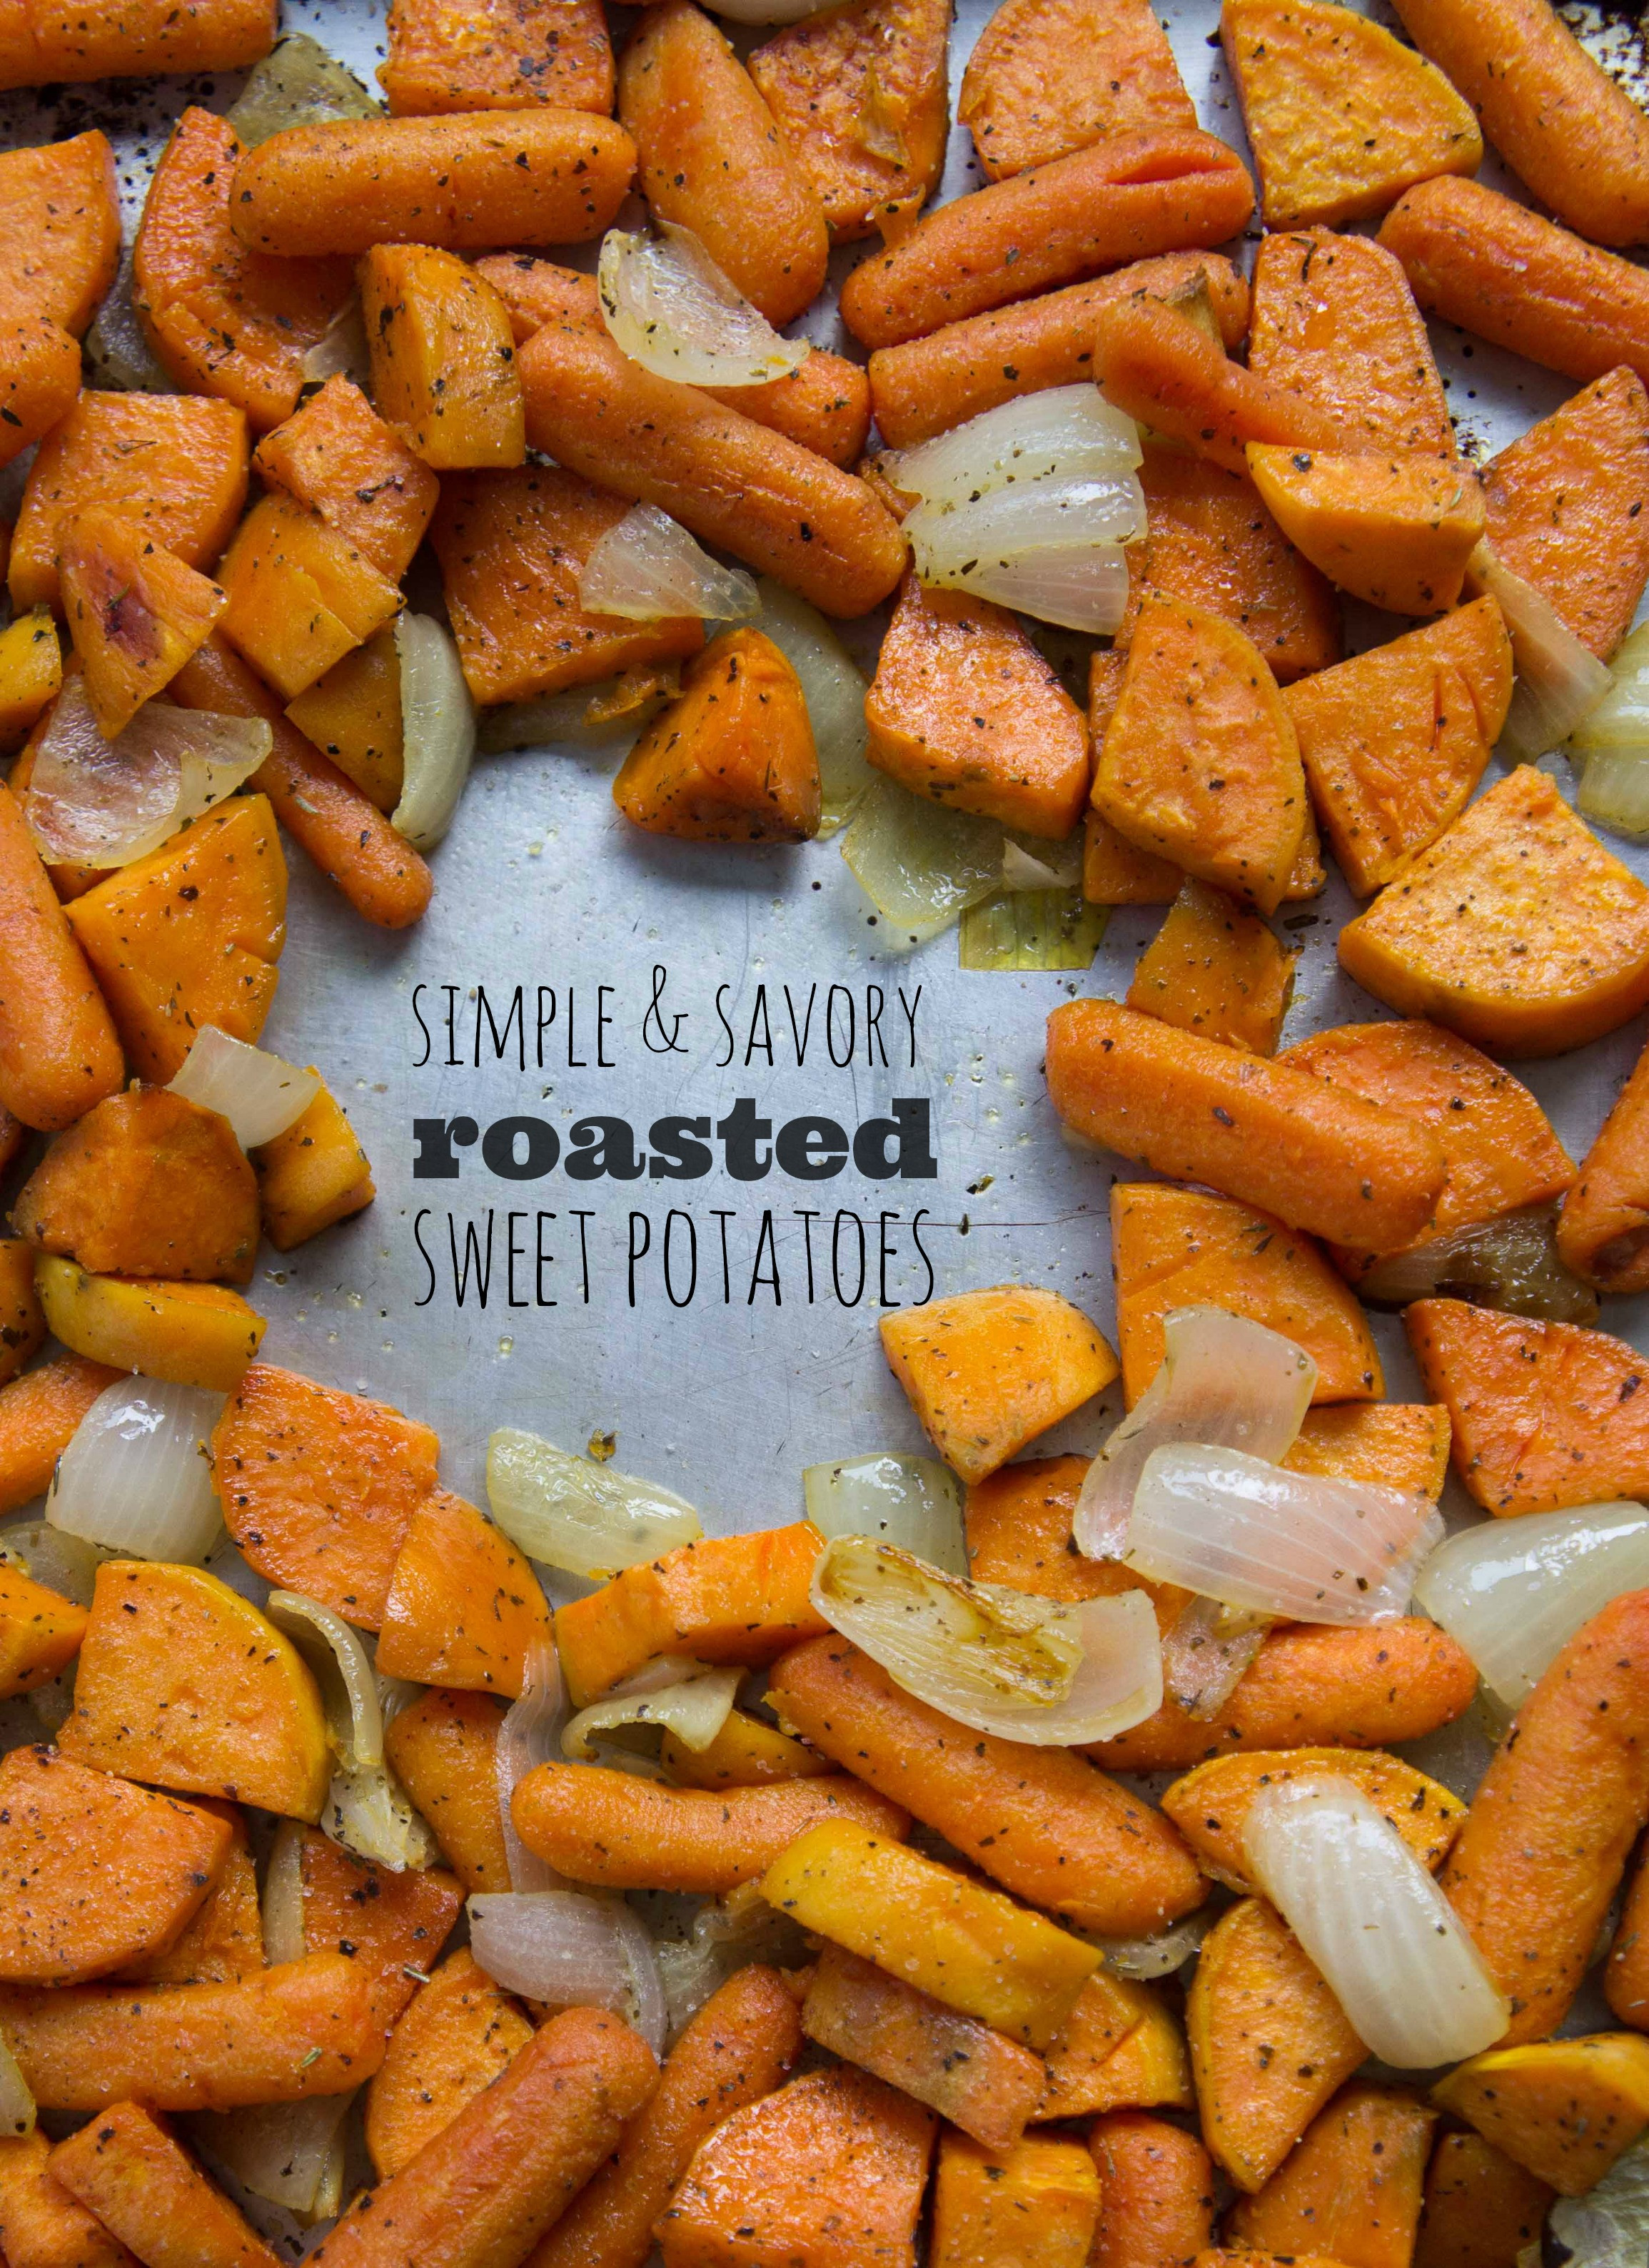 Roasted Sweet Potatoes And Carrots
 Simple and Savory Roasted Sweet Potatoes and Carrots